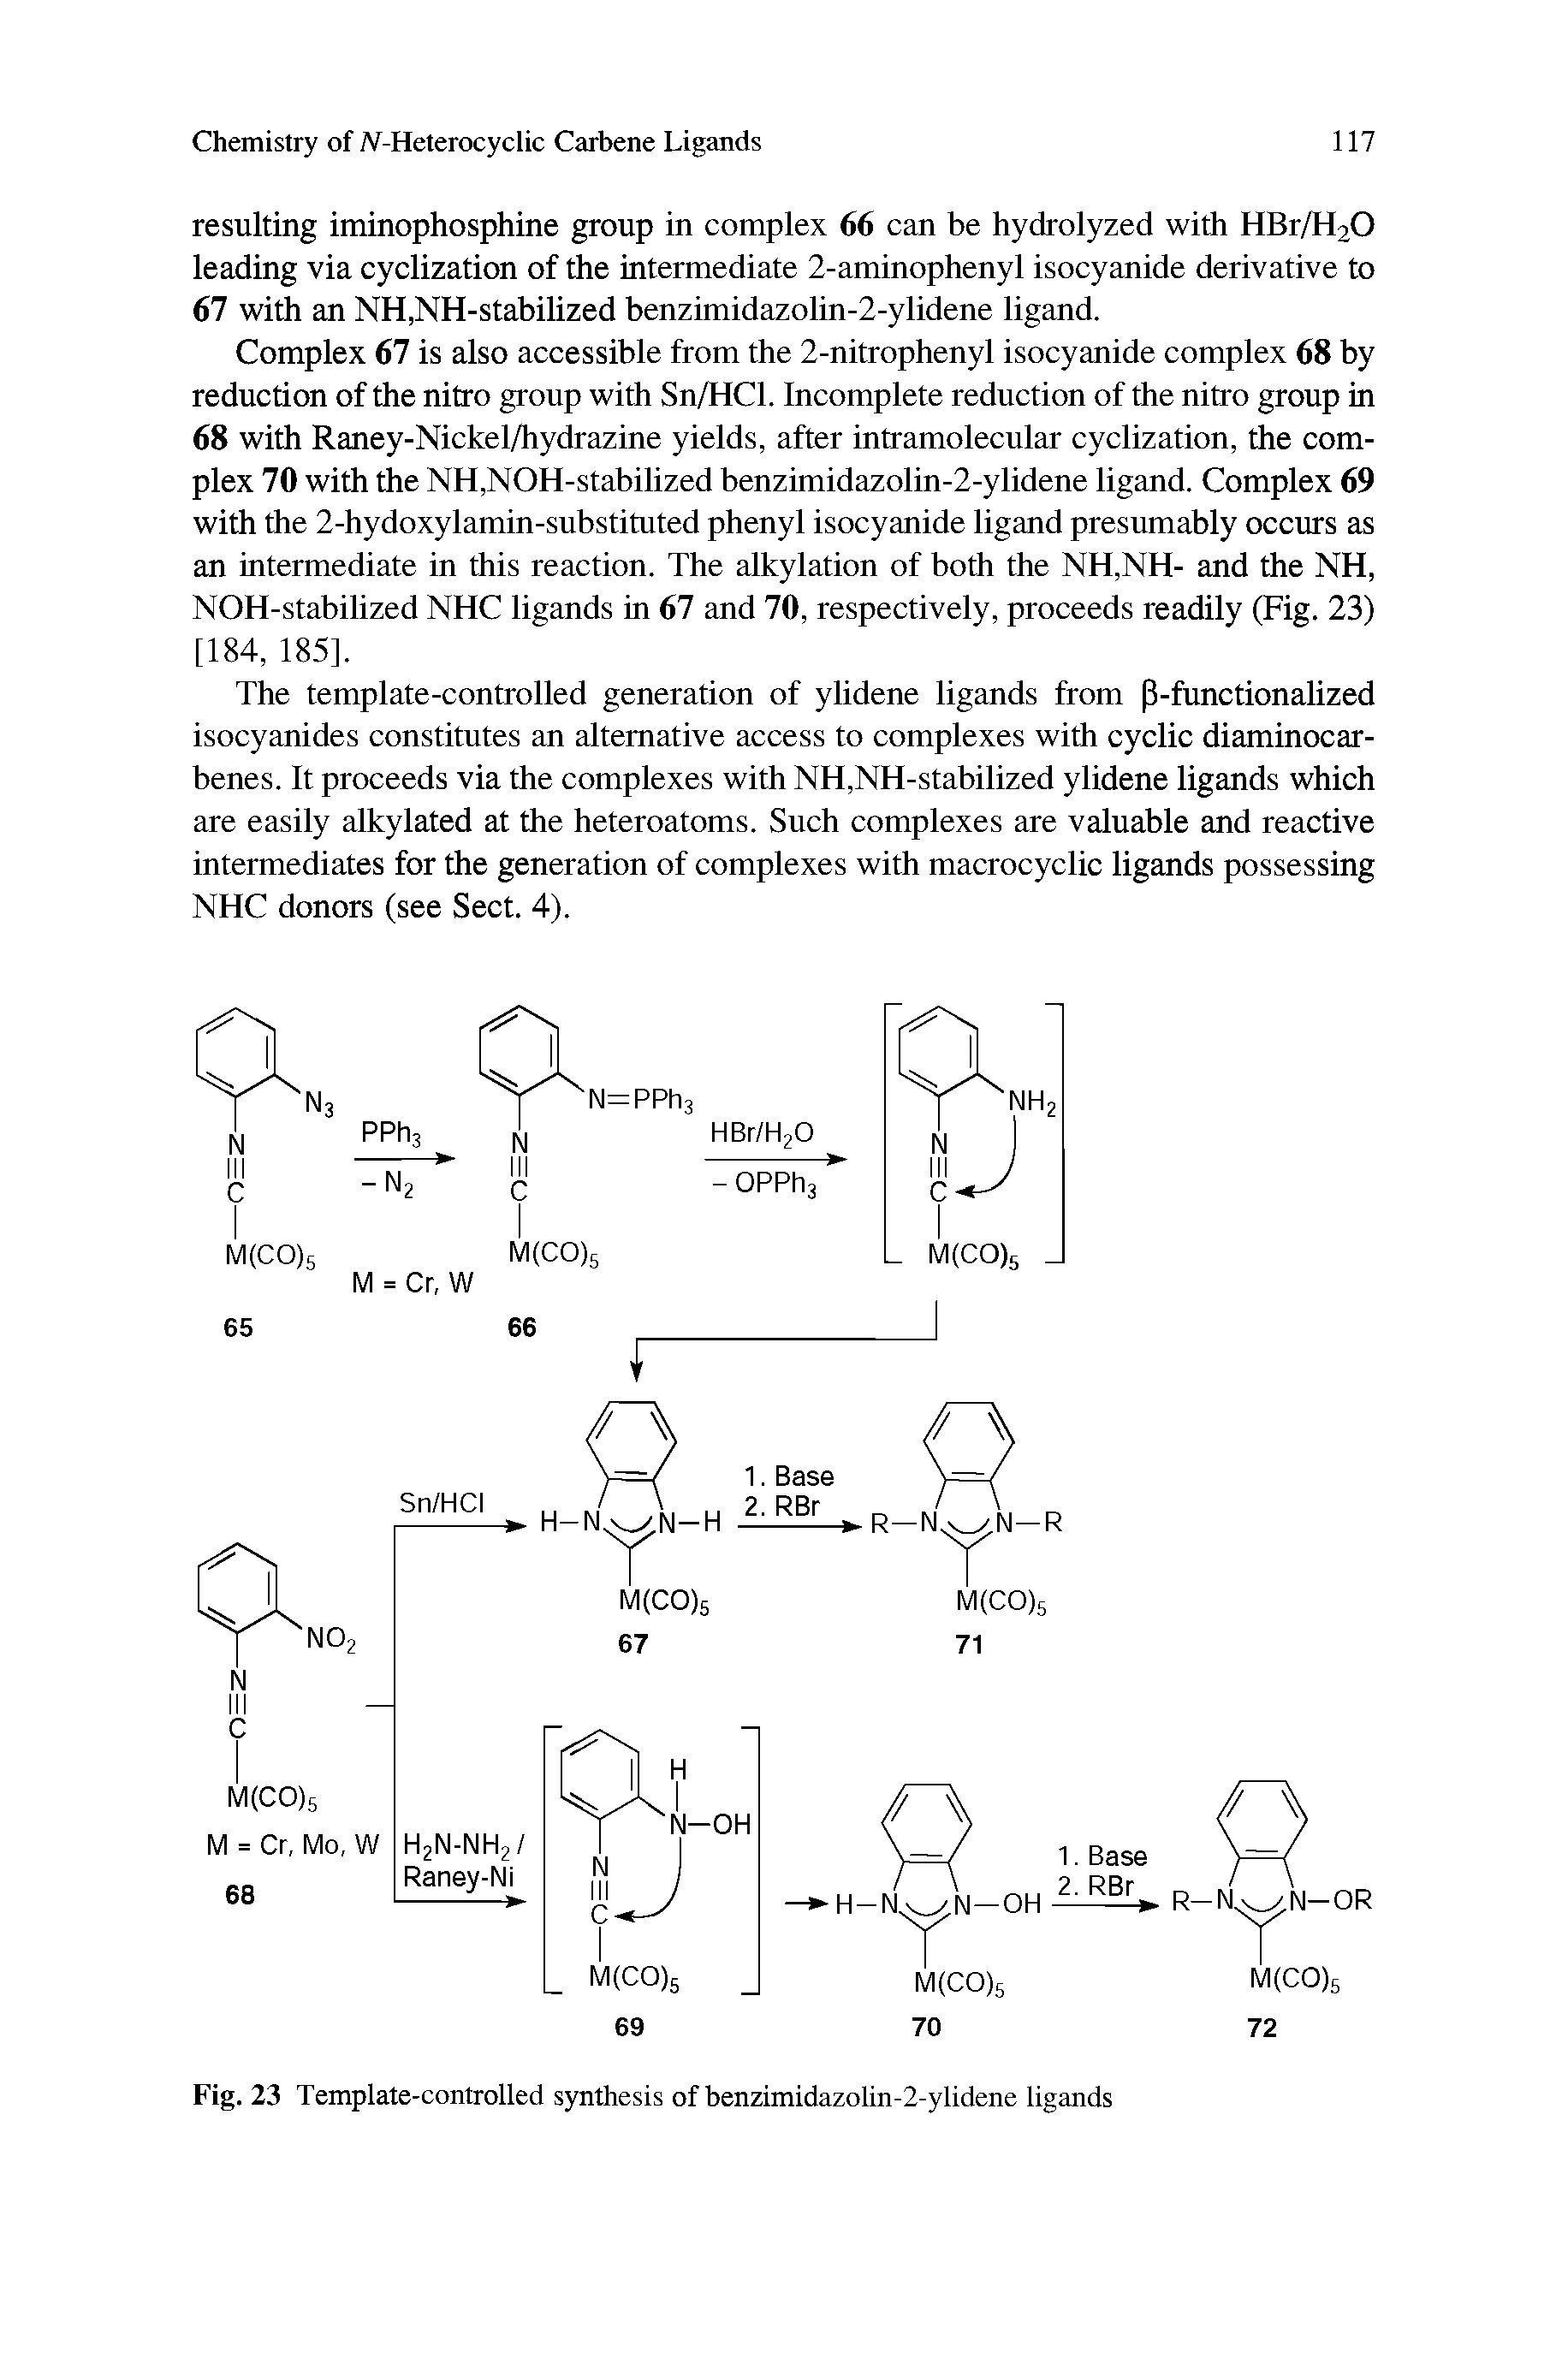 Fig. 23 Template-controlled synthesis of benzimidazolin-2-ylidene ligands...